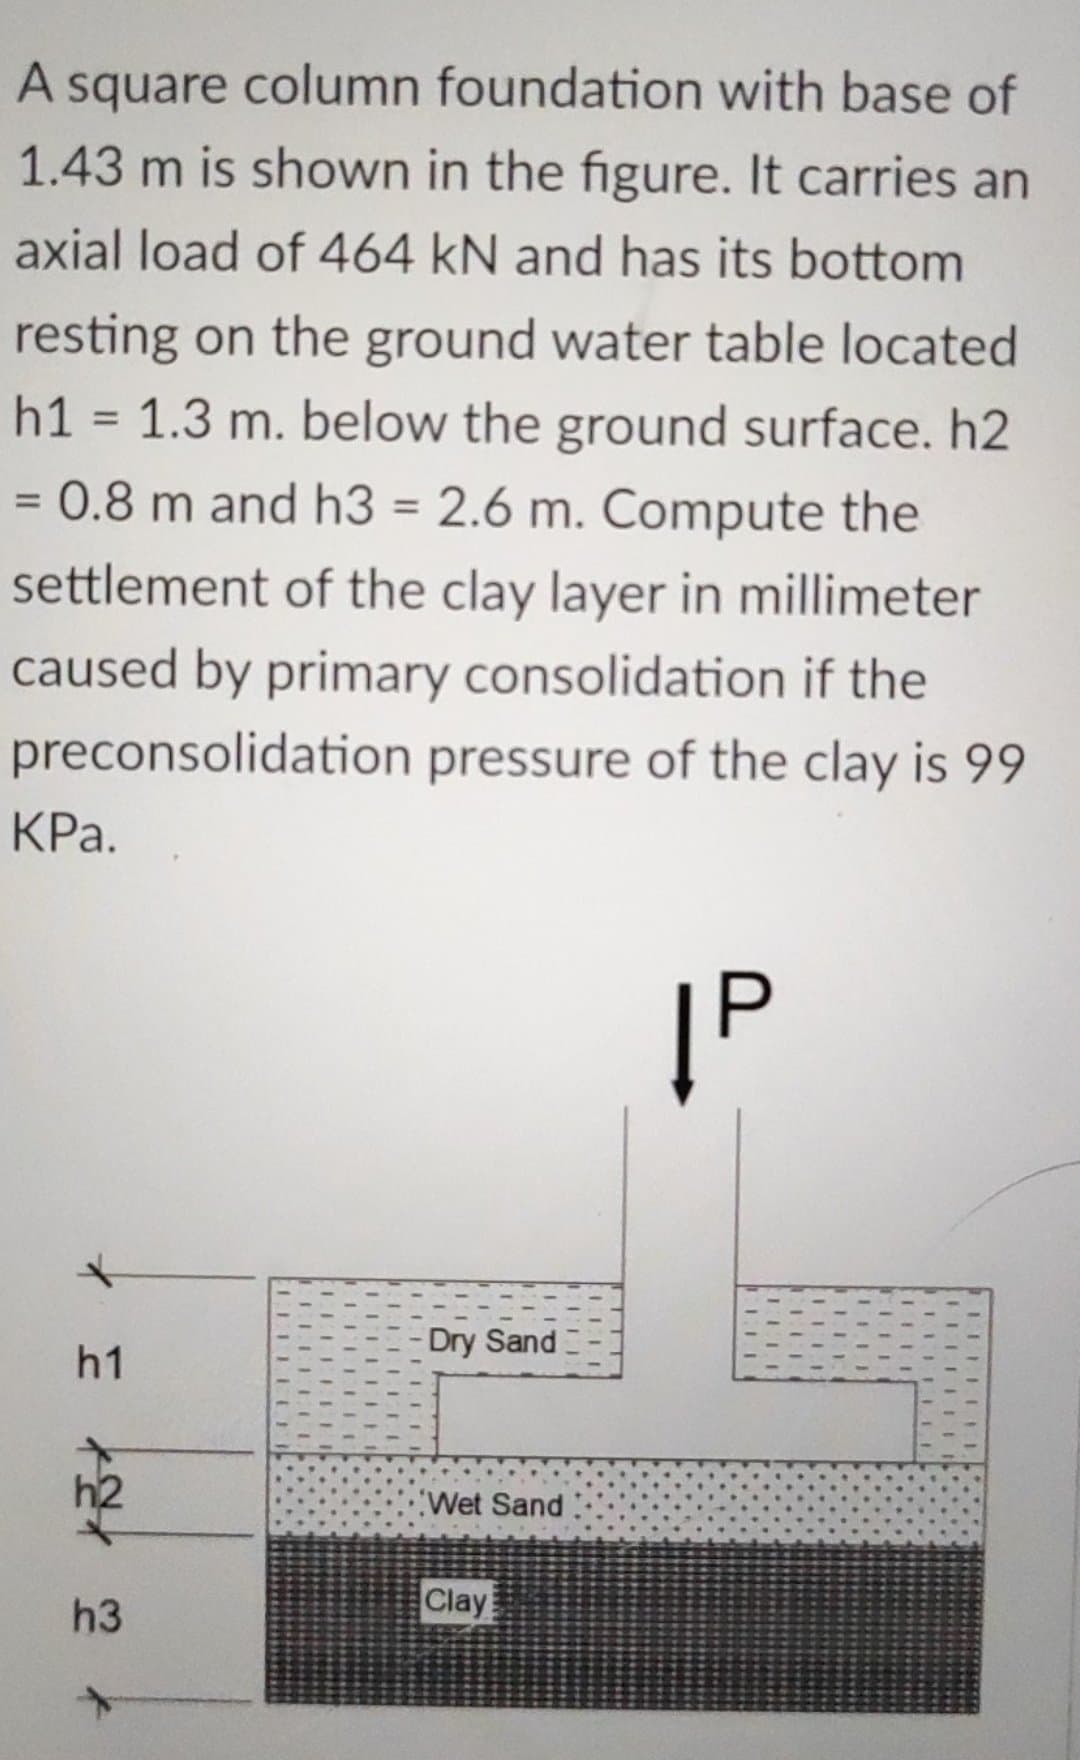 A square column foundation with base of
1.43 m is shown in the figure. It carries an
axial load of 464 kN and has its bottom
resting on the ground water table located
h1 = 1.3 m. below the ground surface. h2
= 0.8 m and h3 = 2.6 m. Compute the
settlement of the clay layer in millimeter
caused by primary consolidation if the
preconsolidation pressure of the clay is 99
KPa.
|P
h1
h3
LLLLL
LII
Dry Sand
Wet Sand
Clay
ITE
TIL
III